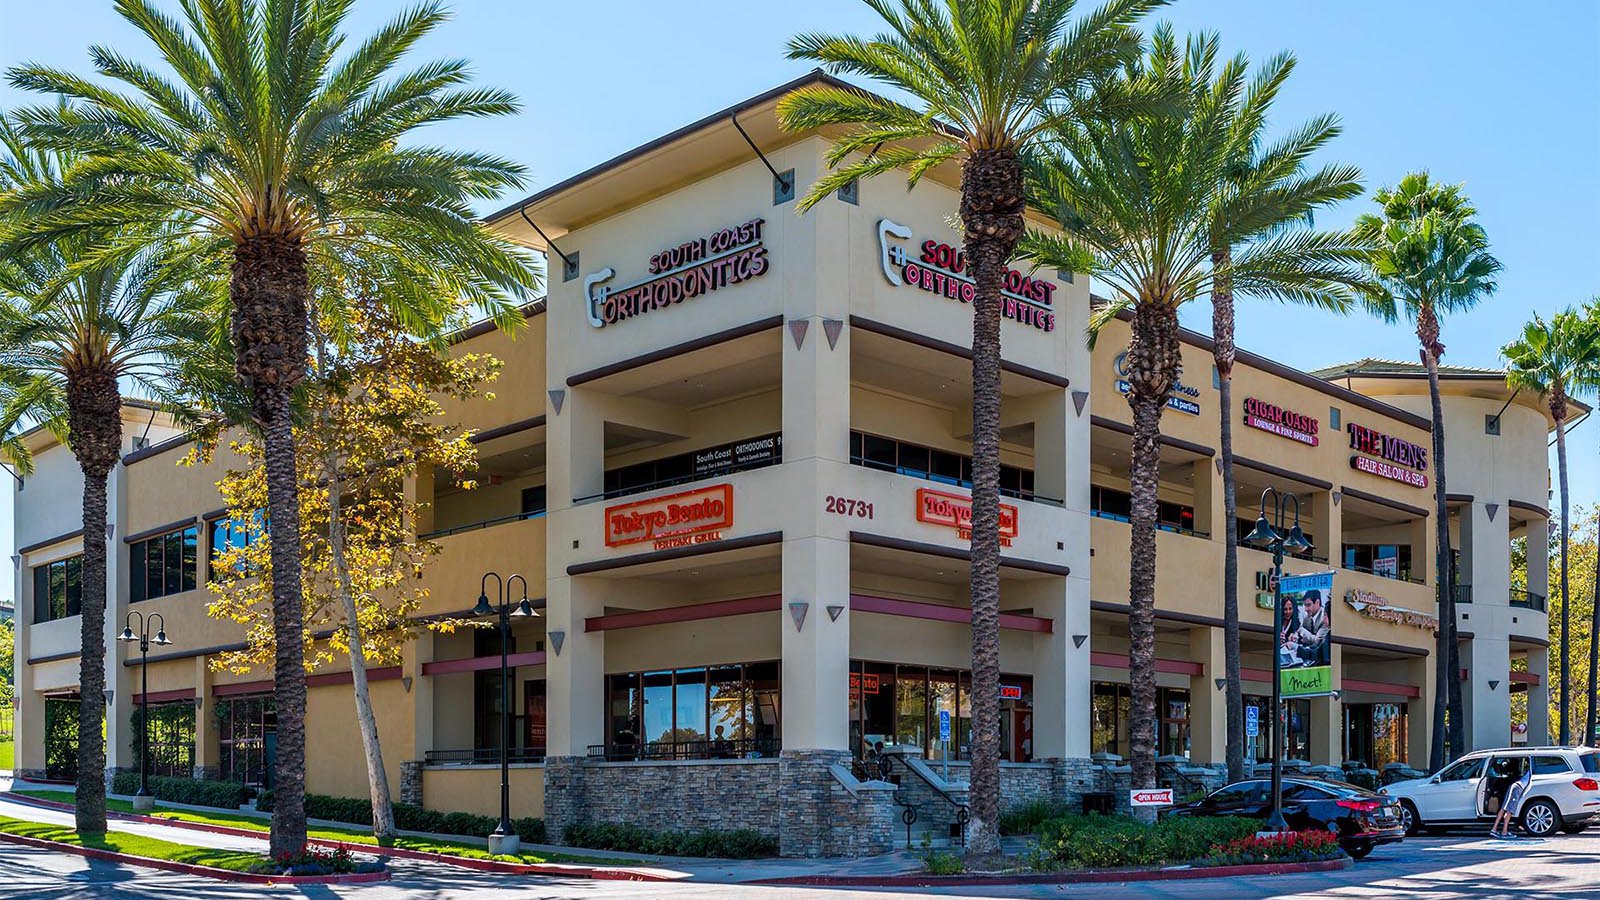 Exterior architectural photo of the Aliso Viejo Towne Center shopping center